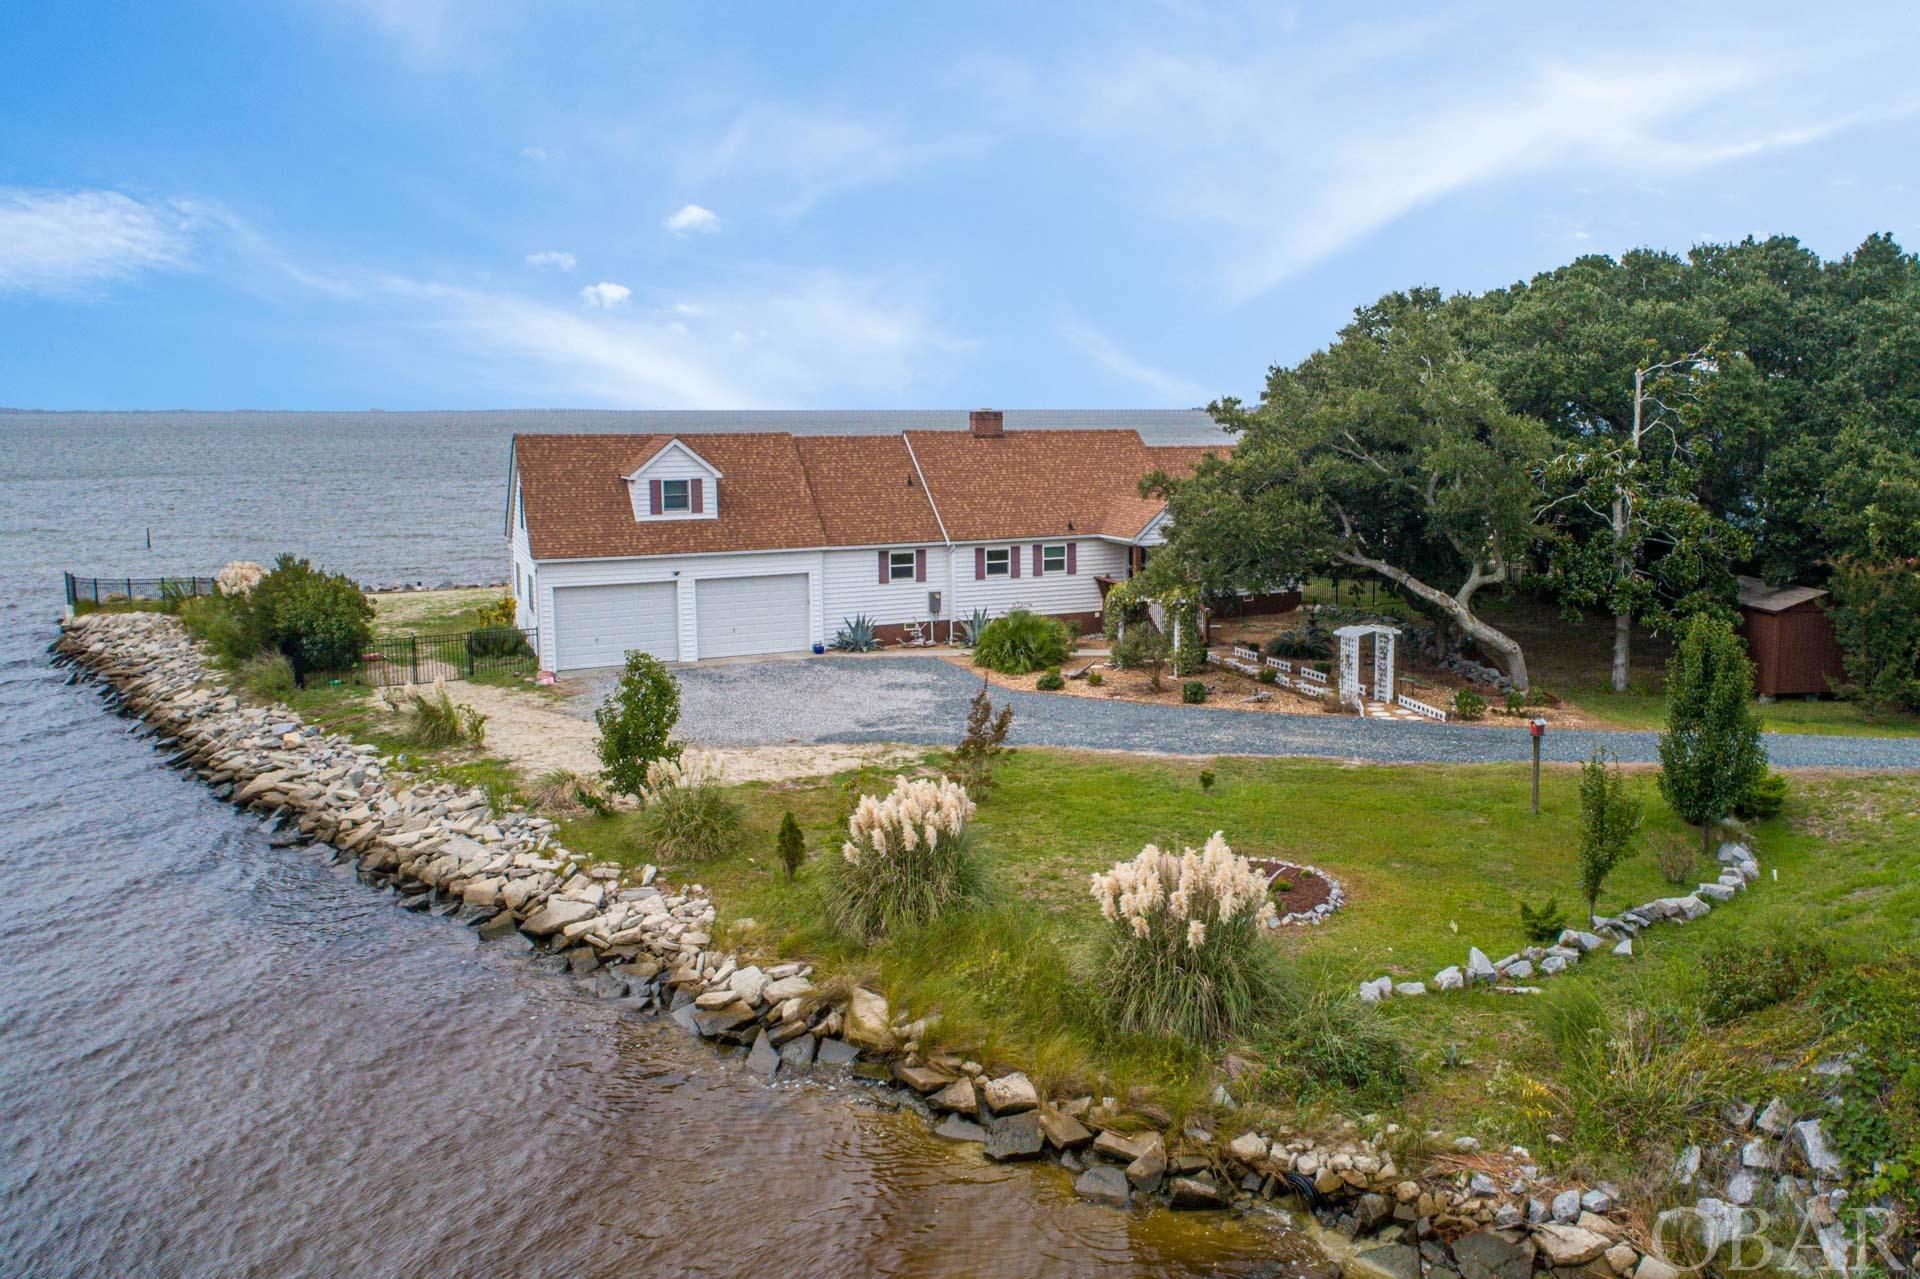 Enjoy serene and sparkling vistas of the Croatan Sound from nearly every room of this exquisite soundfront getaway.  With over 400 feet of unparalleled water frontage, fortified with bulkhead and rip-rap, this residence is a waterfront haven.  Spread across two levels with 5 bedrooms and 4 bathrooms, providing ample space for relaxation and comfort.  Thoughtful and quality features include a custom kitchen with solid wood cabinetry, stainless appliances, a gas cooktop, and separate coffee bar, a large sunroom with UV blocking windows, a 5-person hot tub that overlooks the sound, a first level master with a private deck, and a two-car garage with a back side garage door for yard maintenance.  The upstairs master suite includes a private deck, soaking tub, and tiled shower.  Upstairs you will also find two additional bedrooms and another full bathroom.  Recent updates include, an updated kitchen including a new 6 burner gas cooktop, new kitchen faucet and double wide sink, new designer pendant lighting, a new tile backsplash, new flooring, and new blinds and shades in the kitchen, new interior paint throughout, brand new bulkhead and rip-rap, a new metal ornamental fence, and newly painted decks. Conveniently located right outside the picturesque town of Manteo, known for its charm and scenic beauty, and just 7 miles to the oceanfront and Jennette’s Pier.  You will spend your summers swimming in the shallow sandy bottom sound, and your winters cozied up by the gas burning fireplace in the heart of the home.  Add this home to your list and see it for yourself!